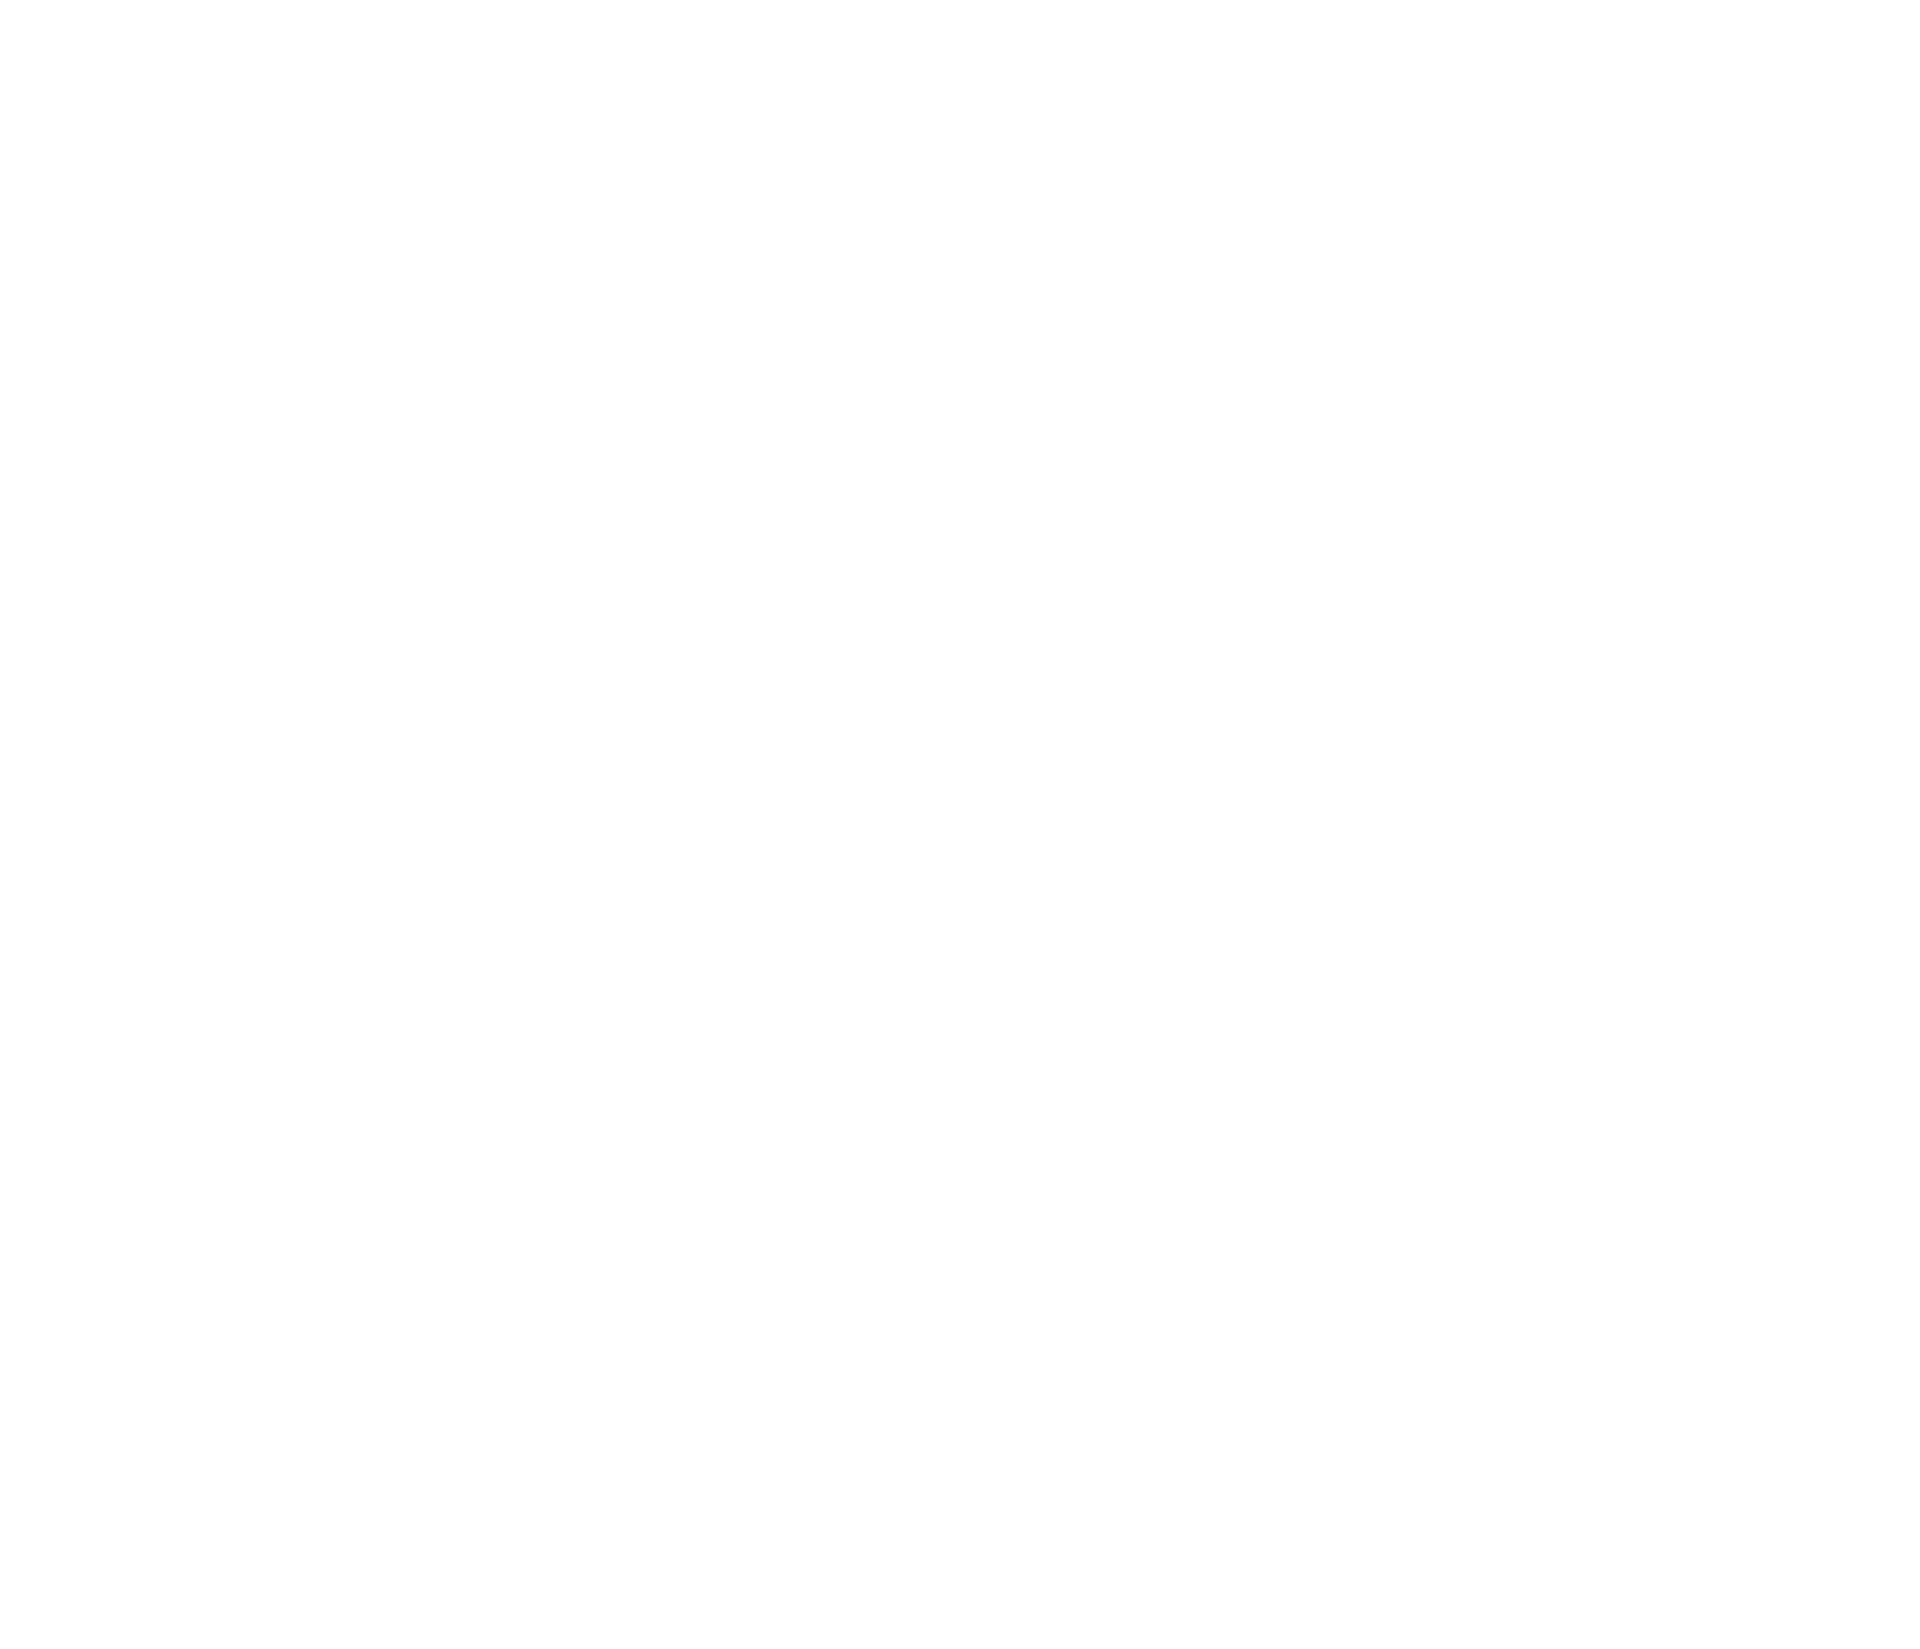 The Rose Law Firm, LLC Homepage